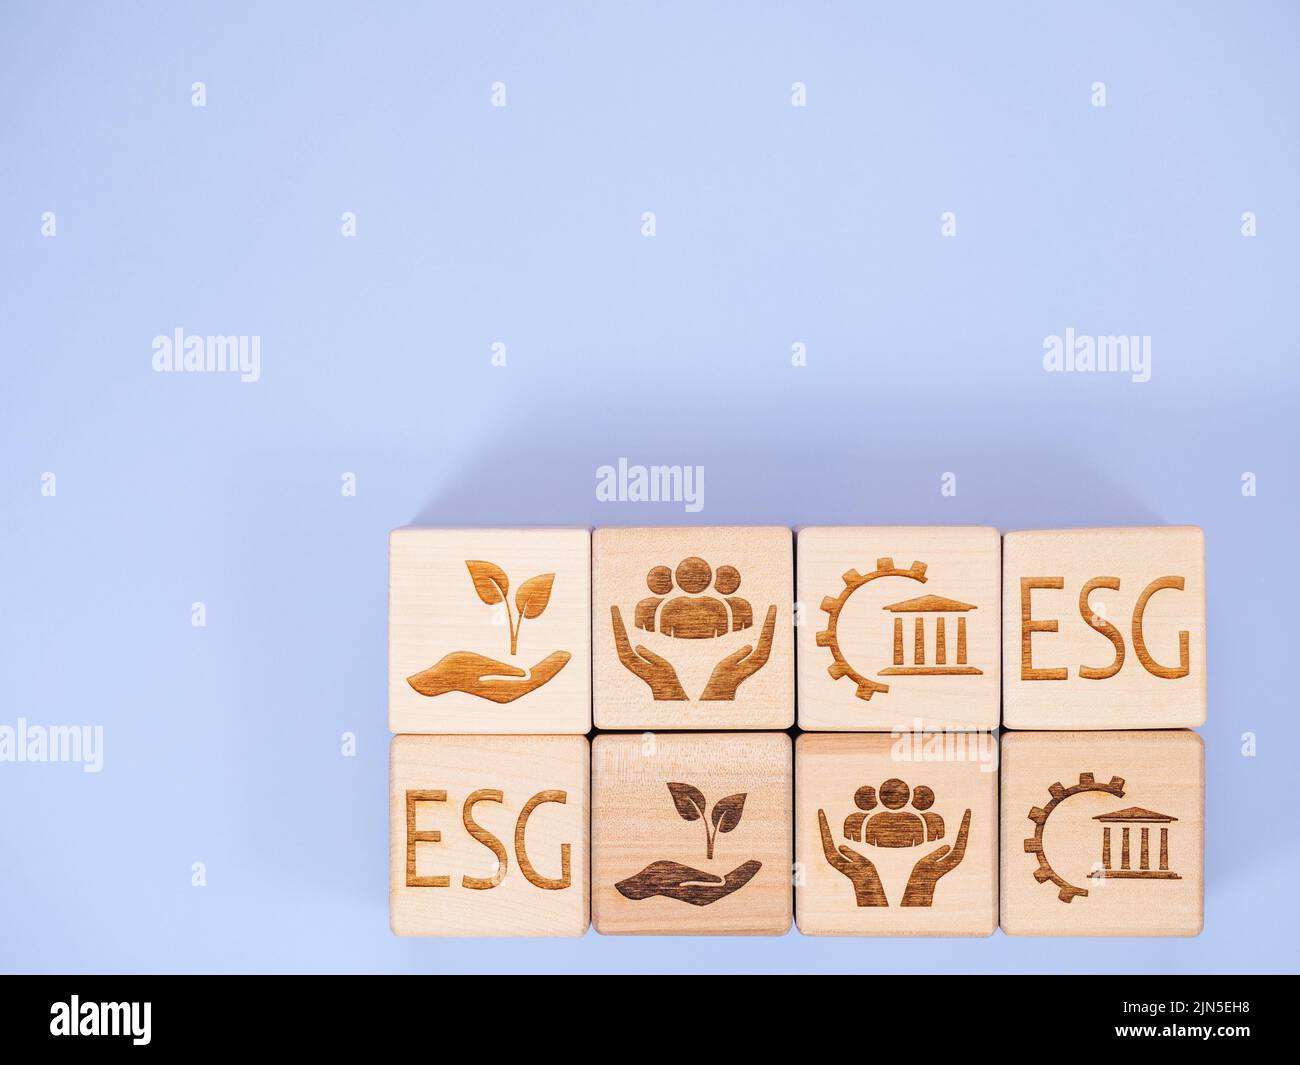 ESG text and symbols on wooden cubes as an environmental conservation concept Stock Photo